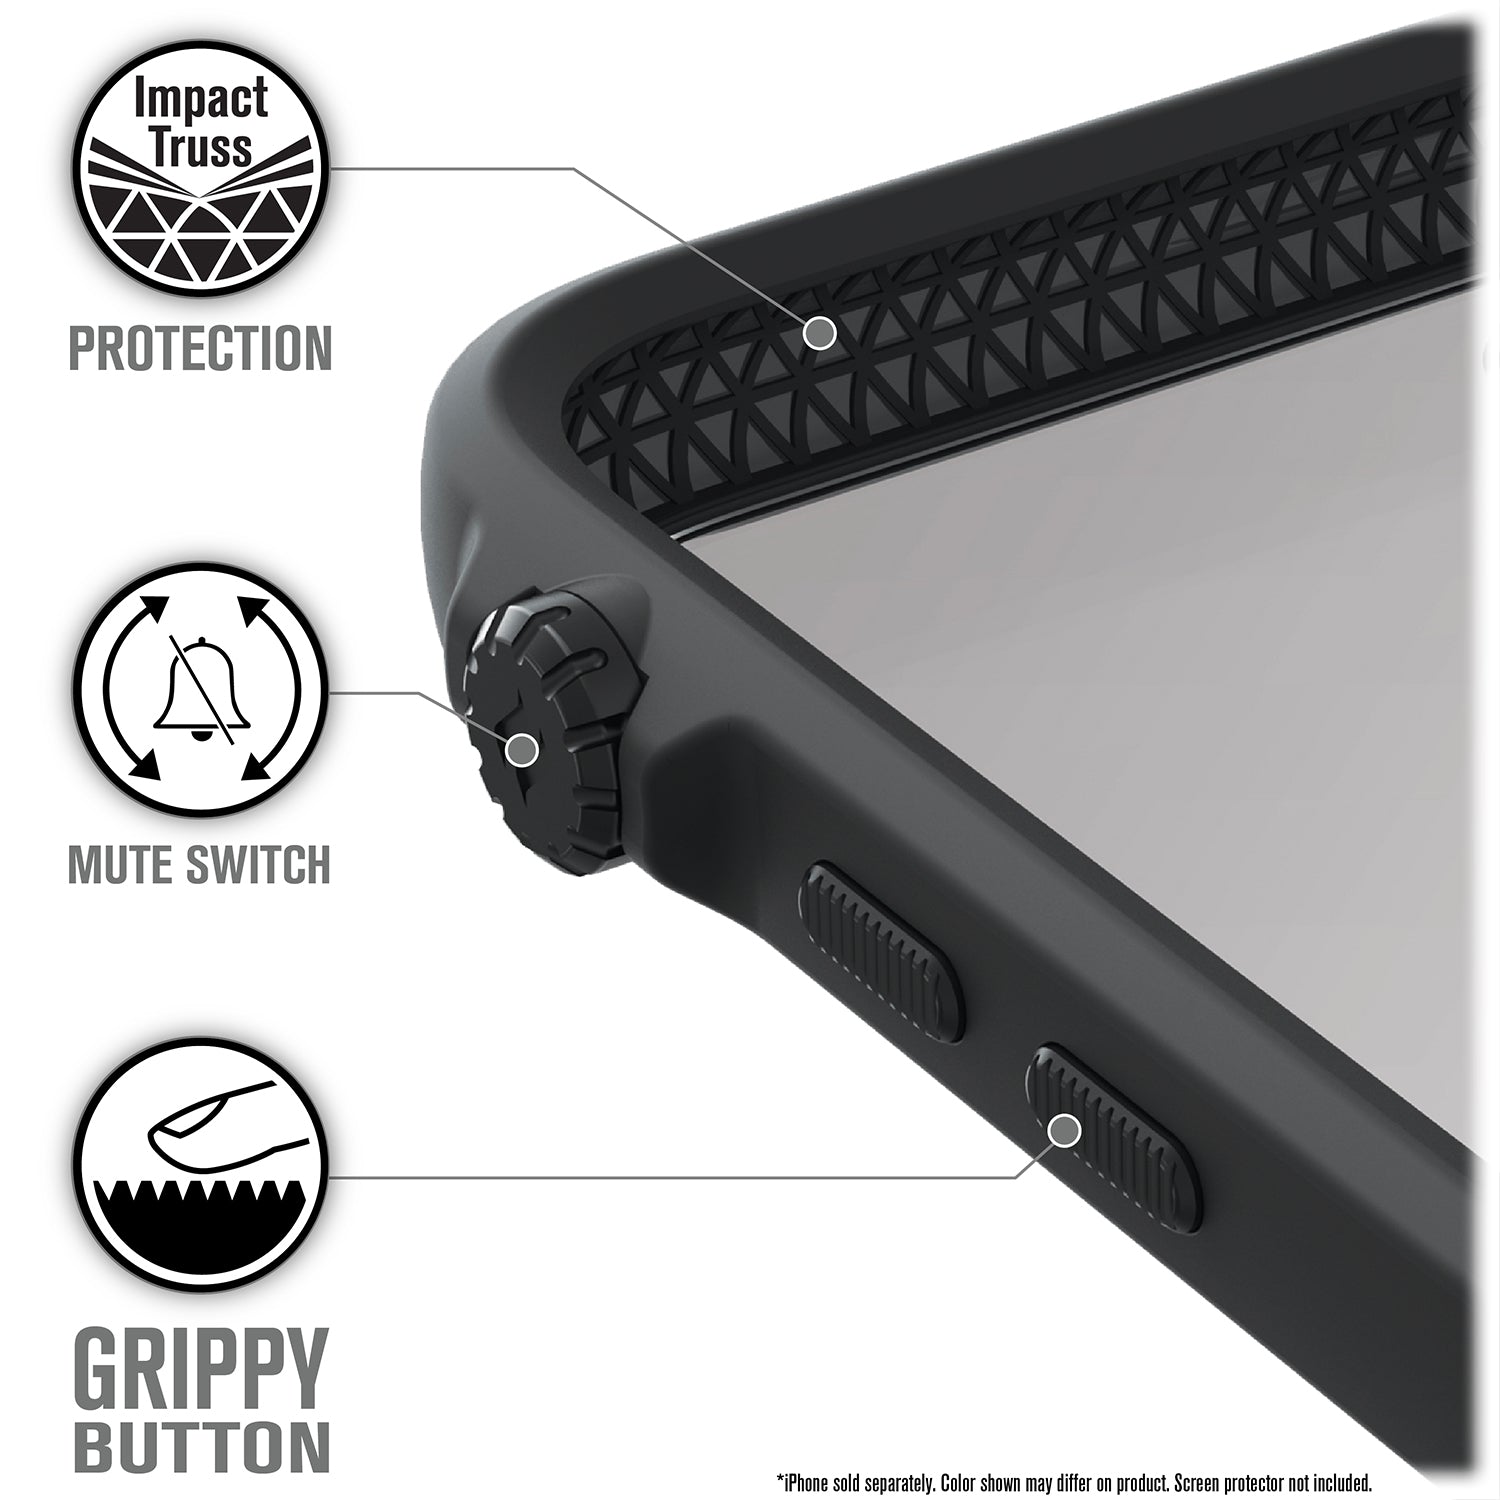 Catalyst iphone 8/7 impact protection case showing the case's geometrical design in a stealth black colorway text reads impact truss protection mute switch grippy button